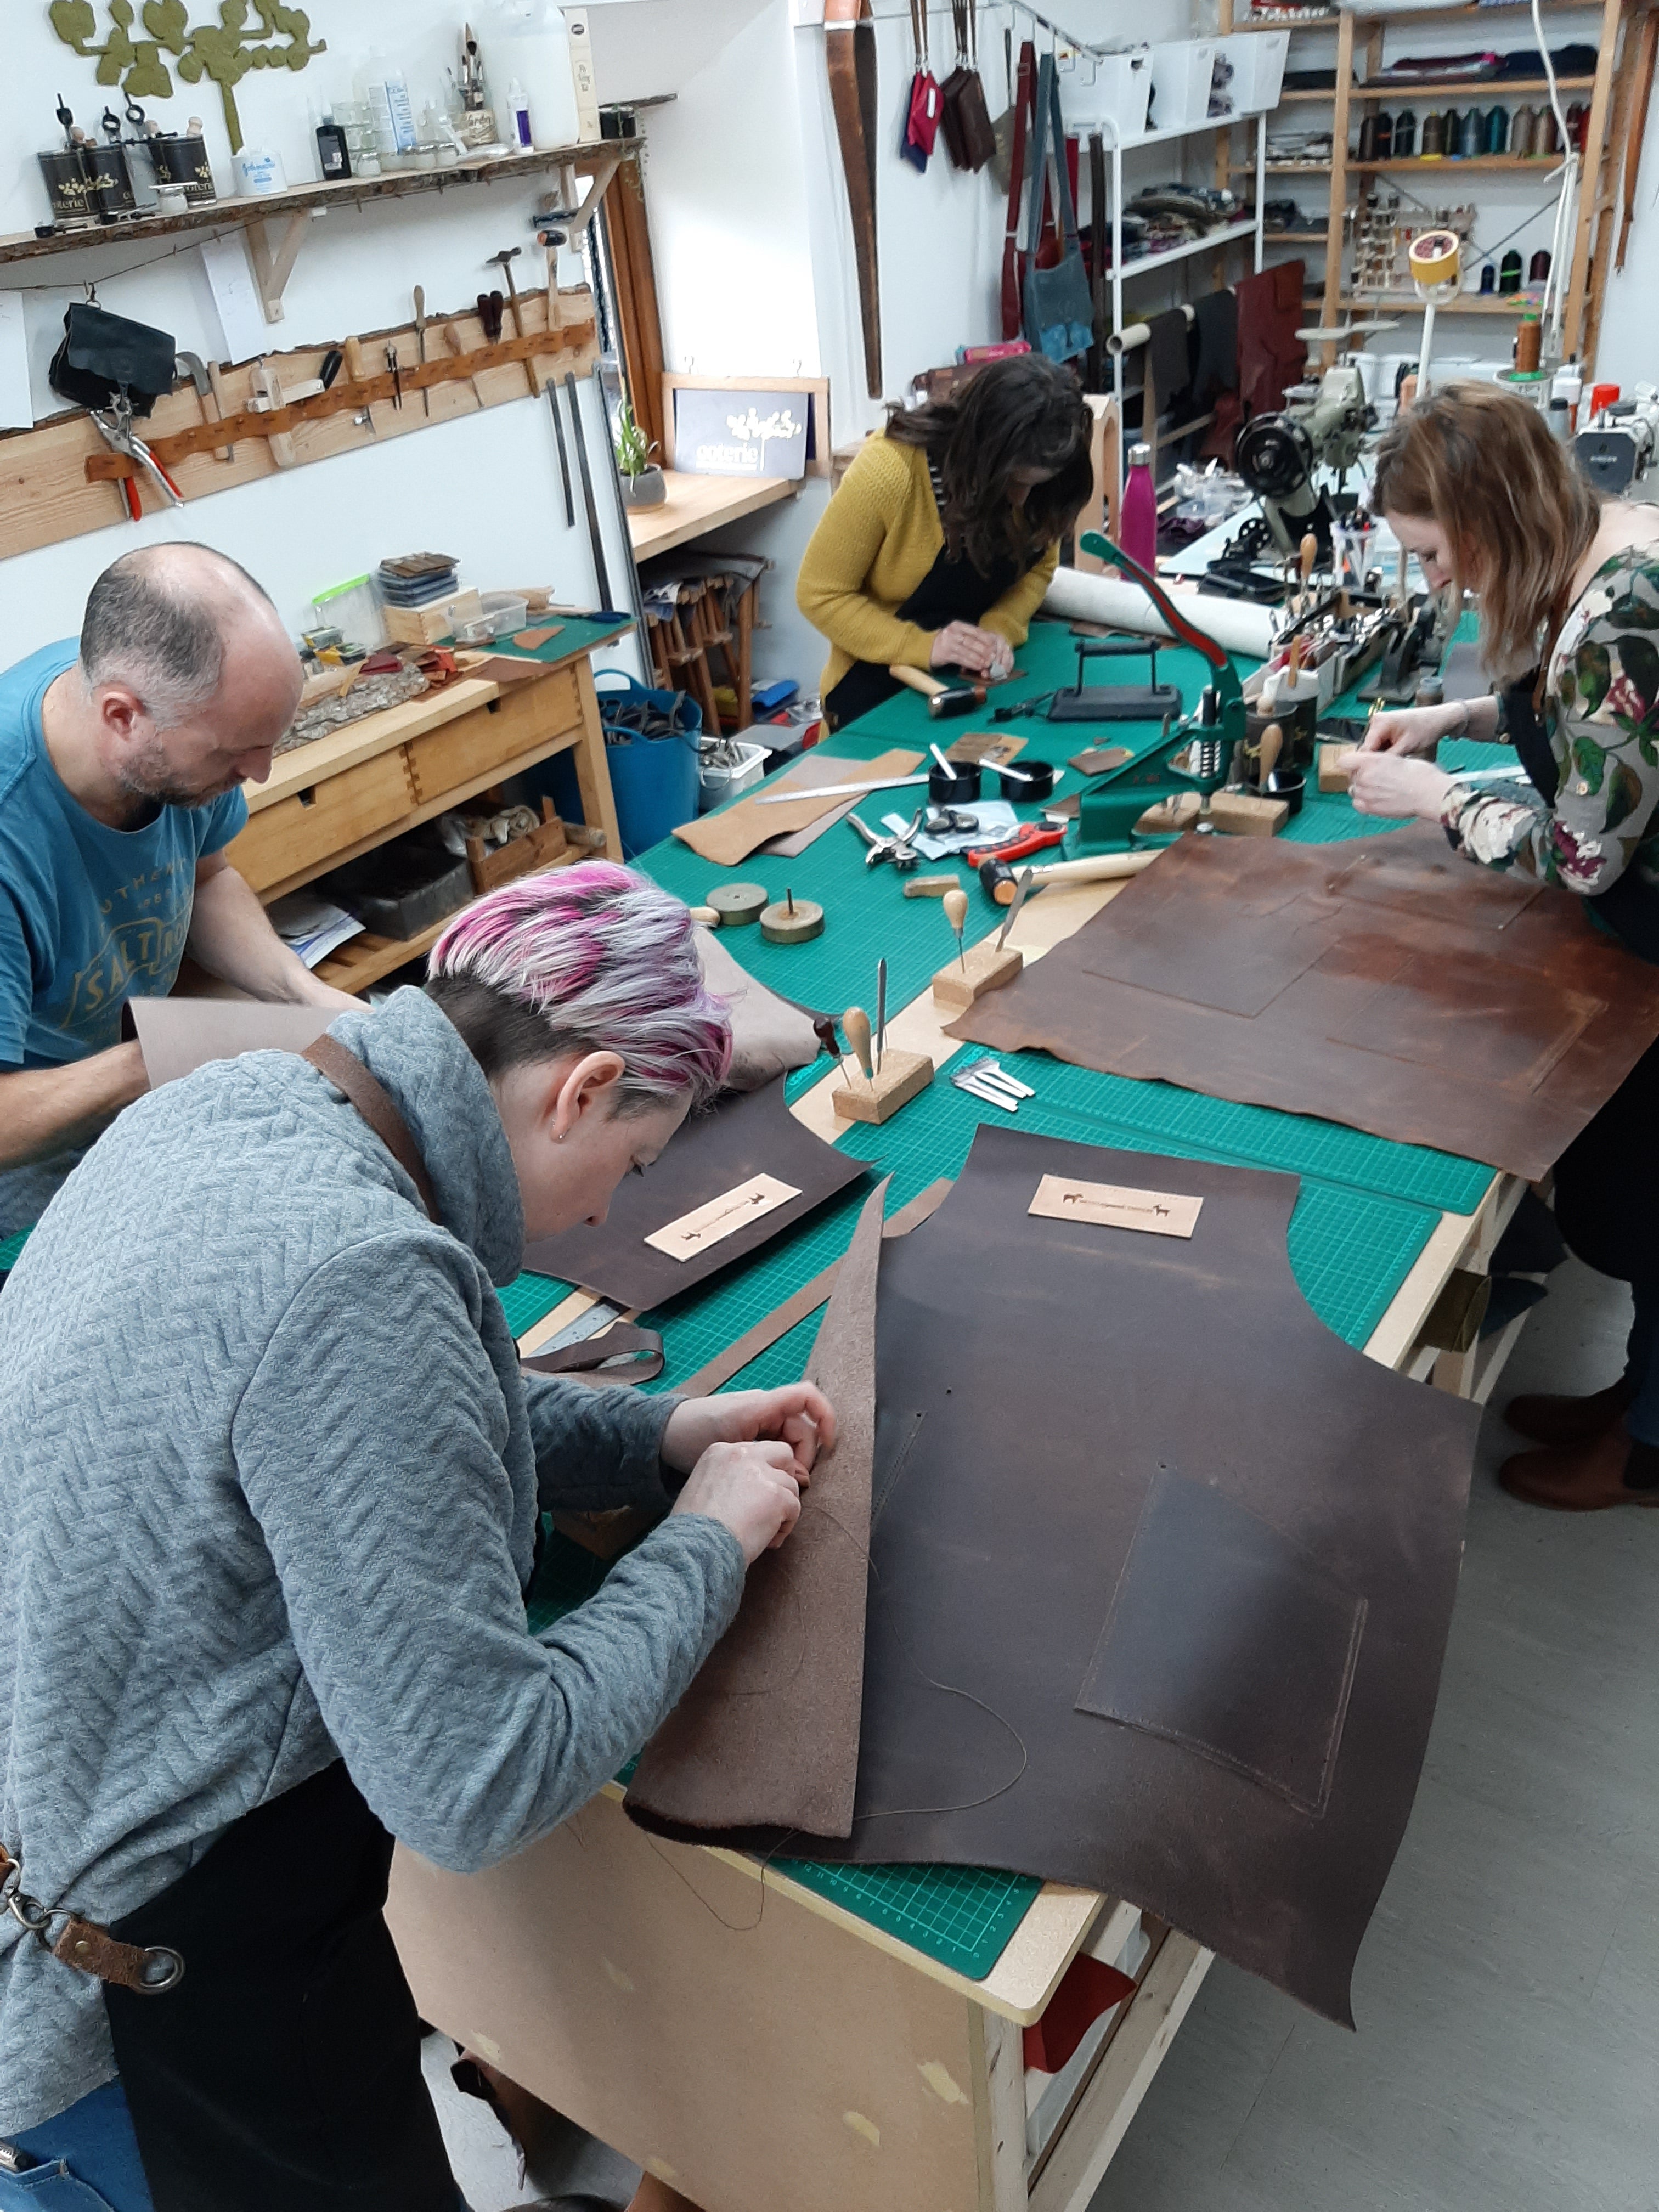 Leather Apron Workshop - learn to hand stitch leather